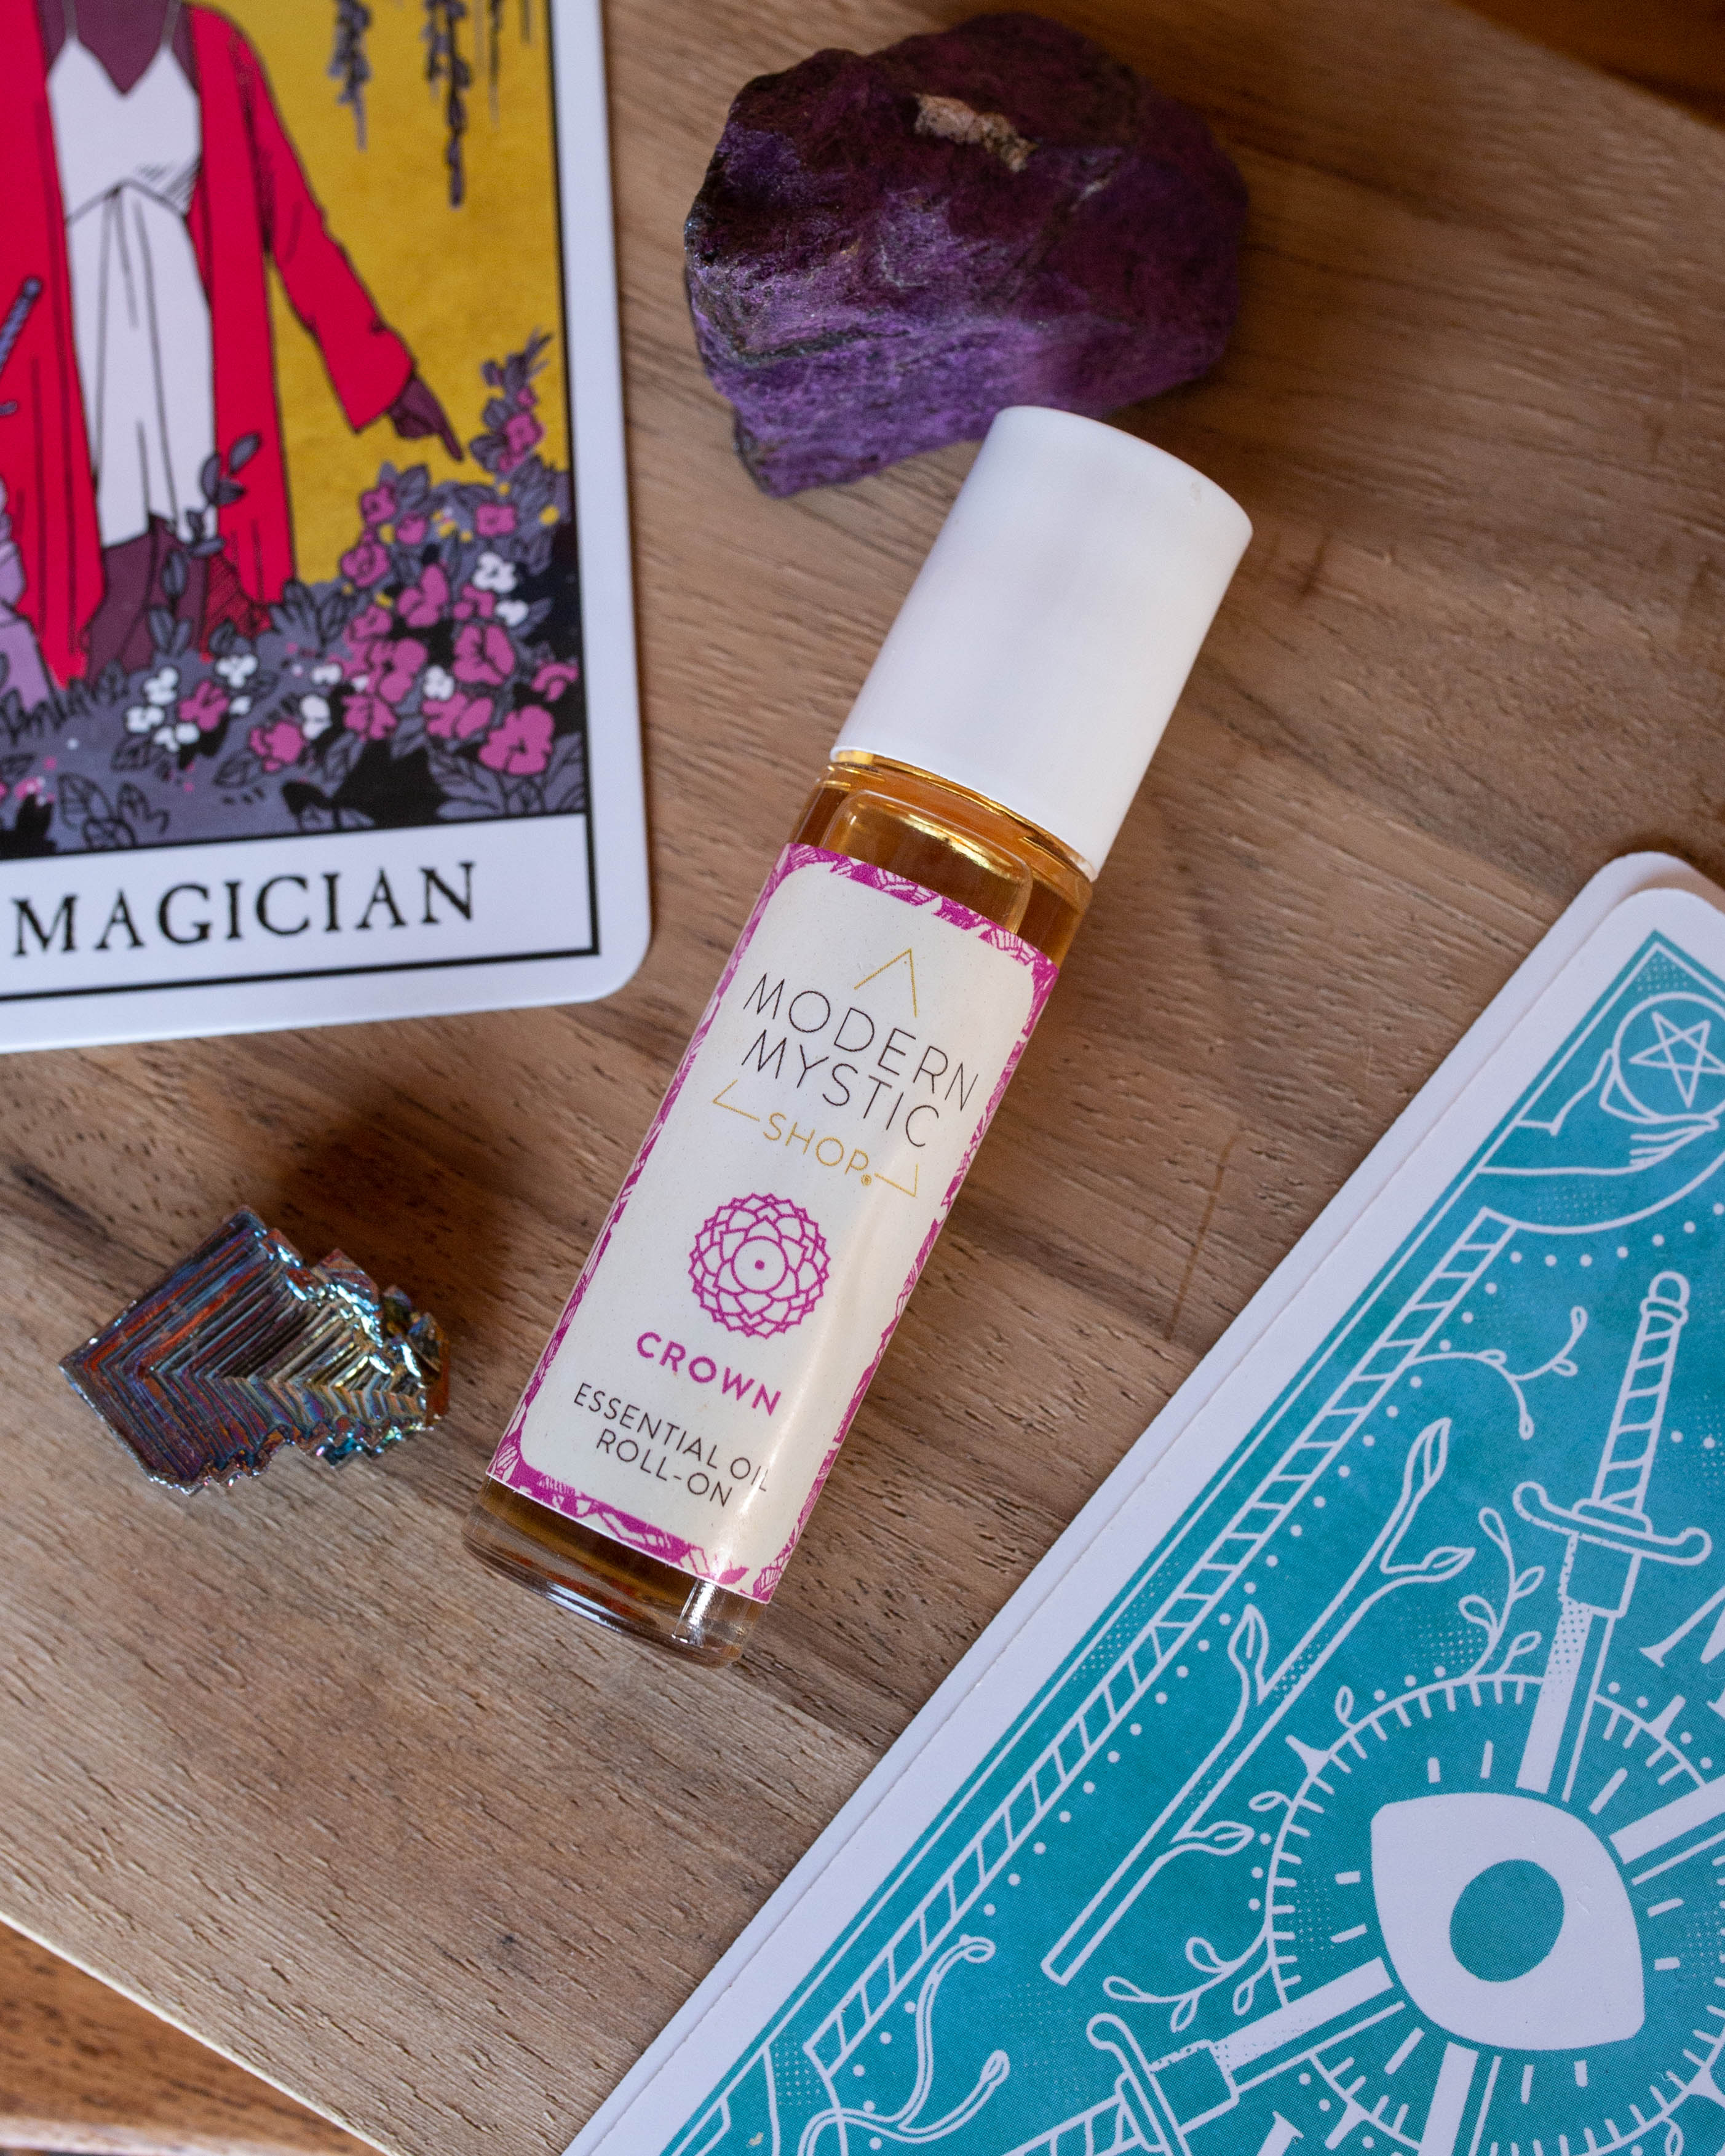 Crown Chakra Essential Oil Roll On